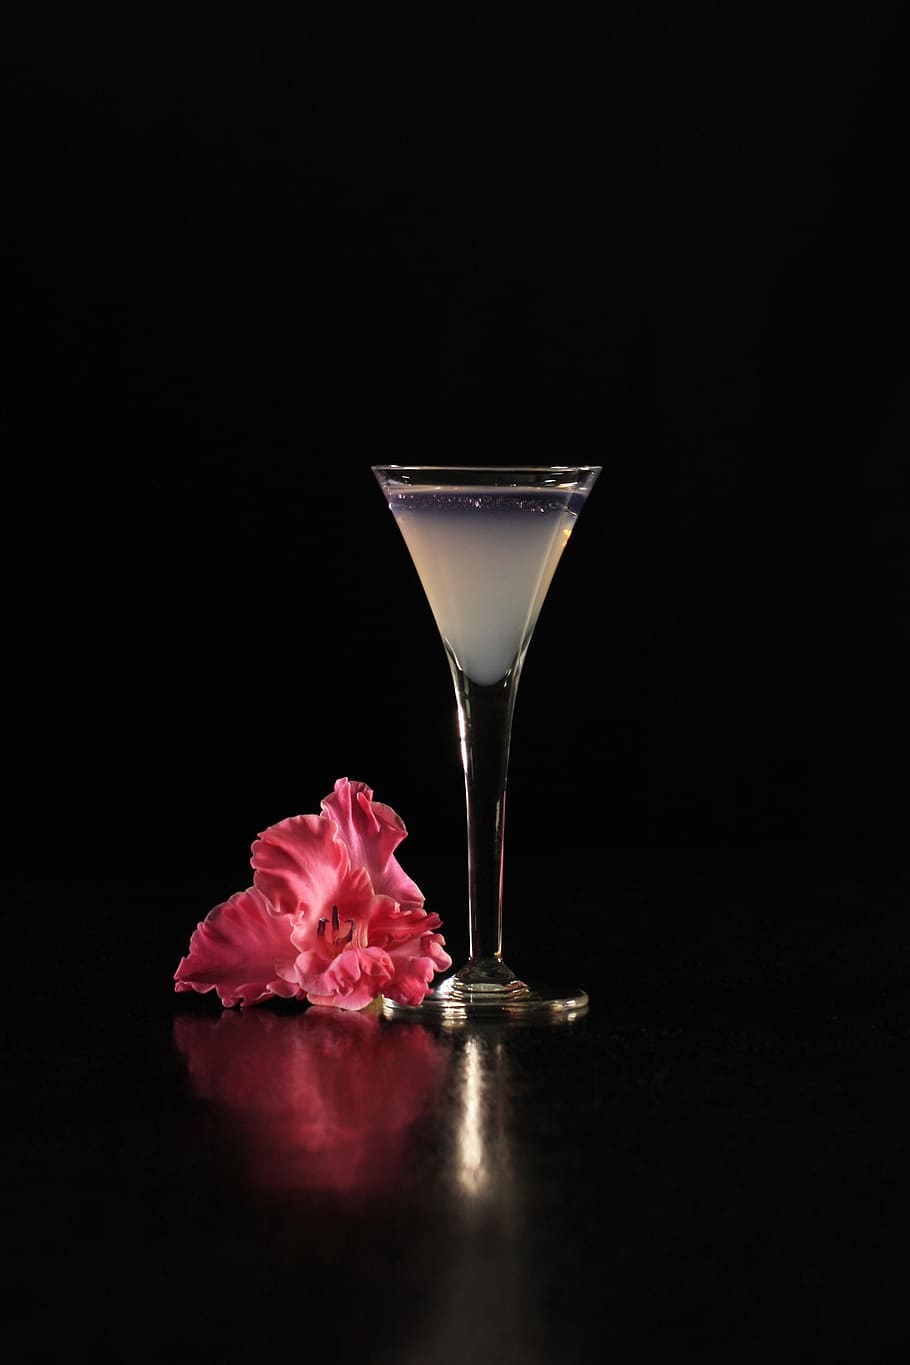 martini, cocktail, alcohol, glass, drink, alcoholic, cocktails, flower, pink, martini glass